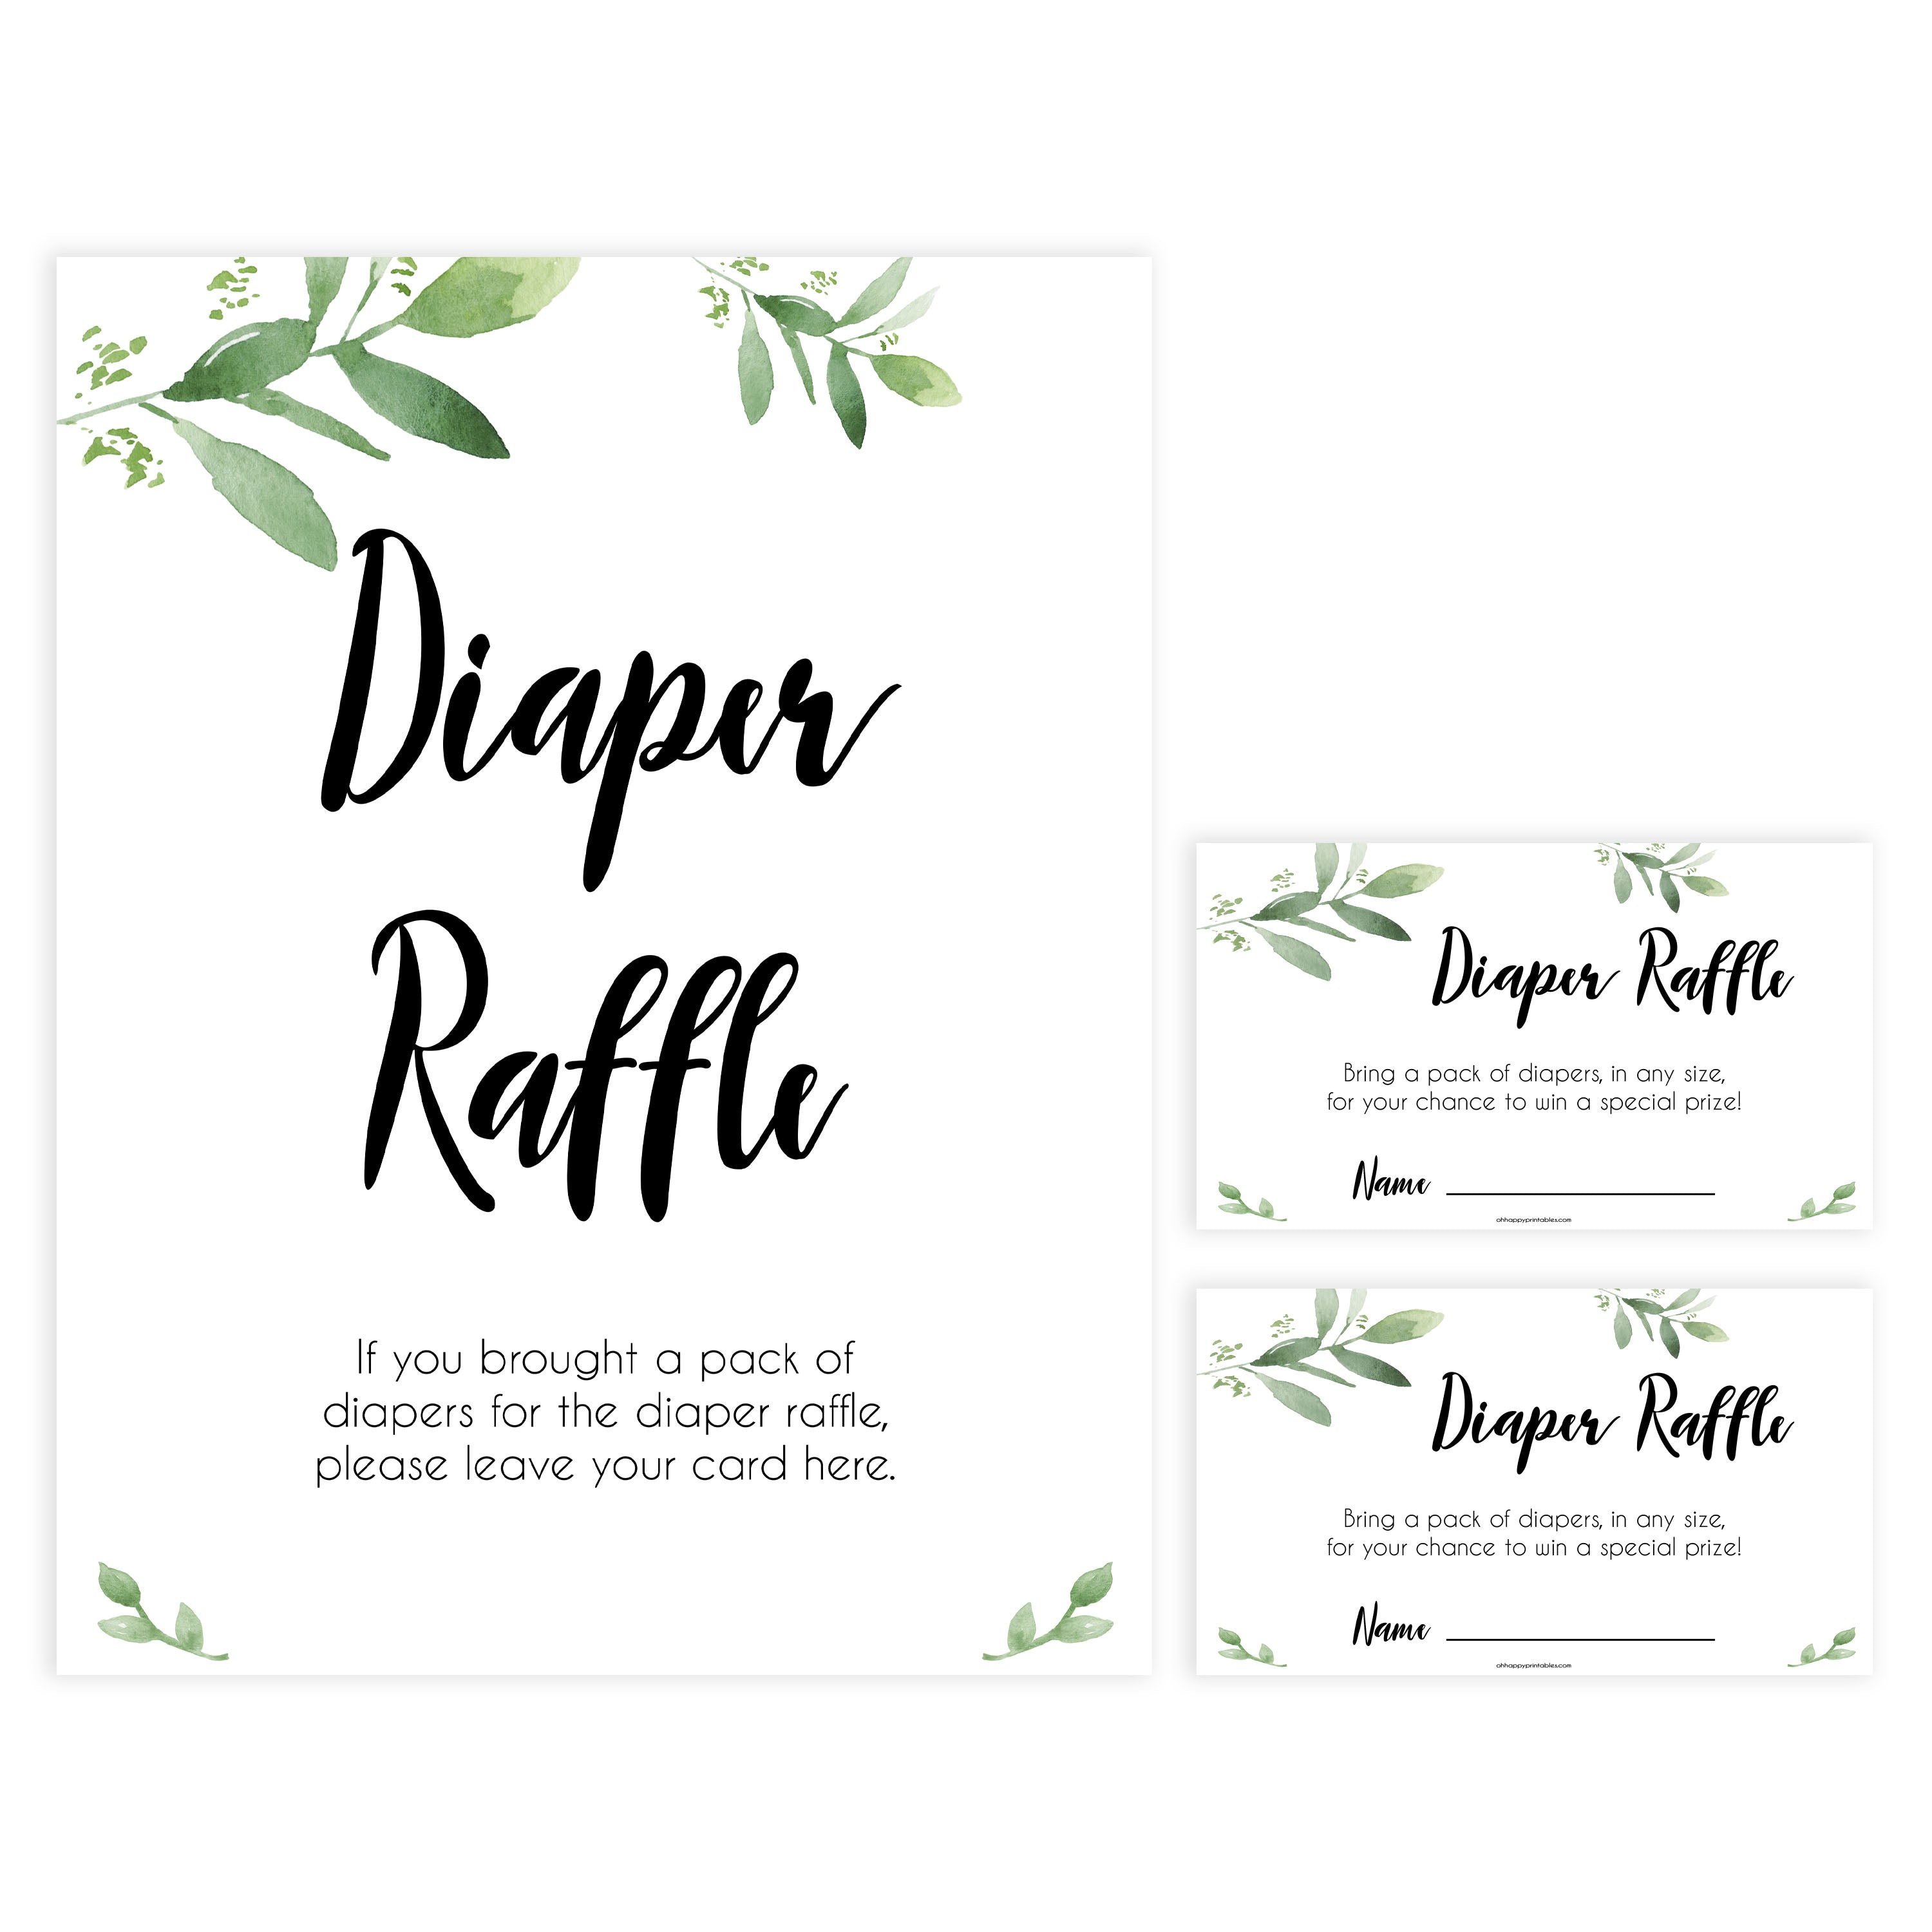 diaper raffle game, Printable baby shower games, botanical baby shower games, floral baby shower ideas, fun baby shower ideas